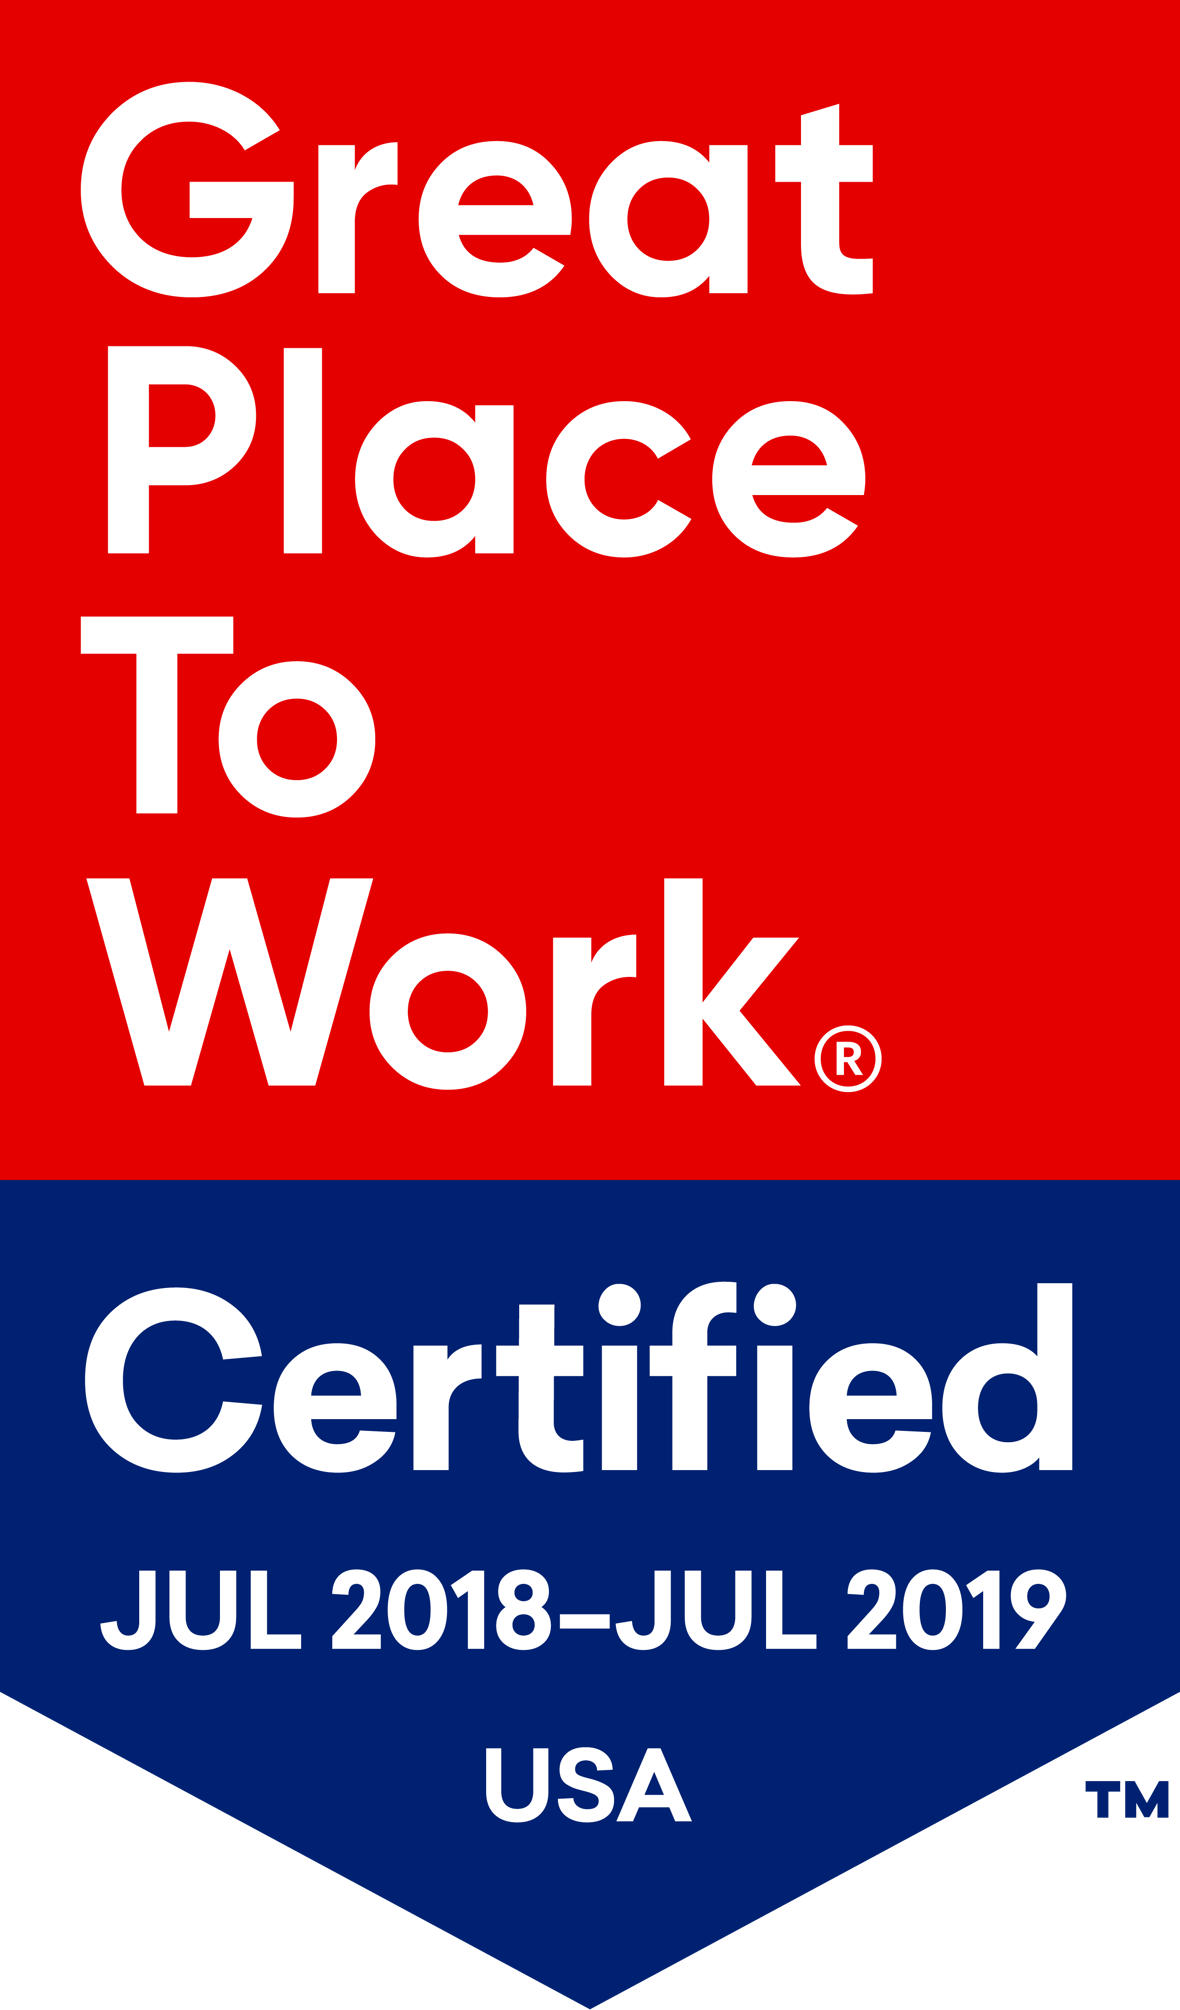 Great place to work certified badge